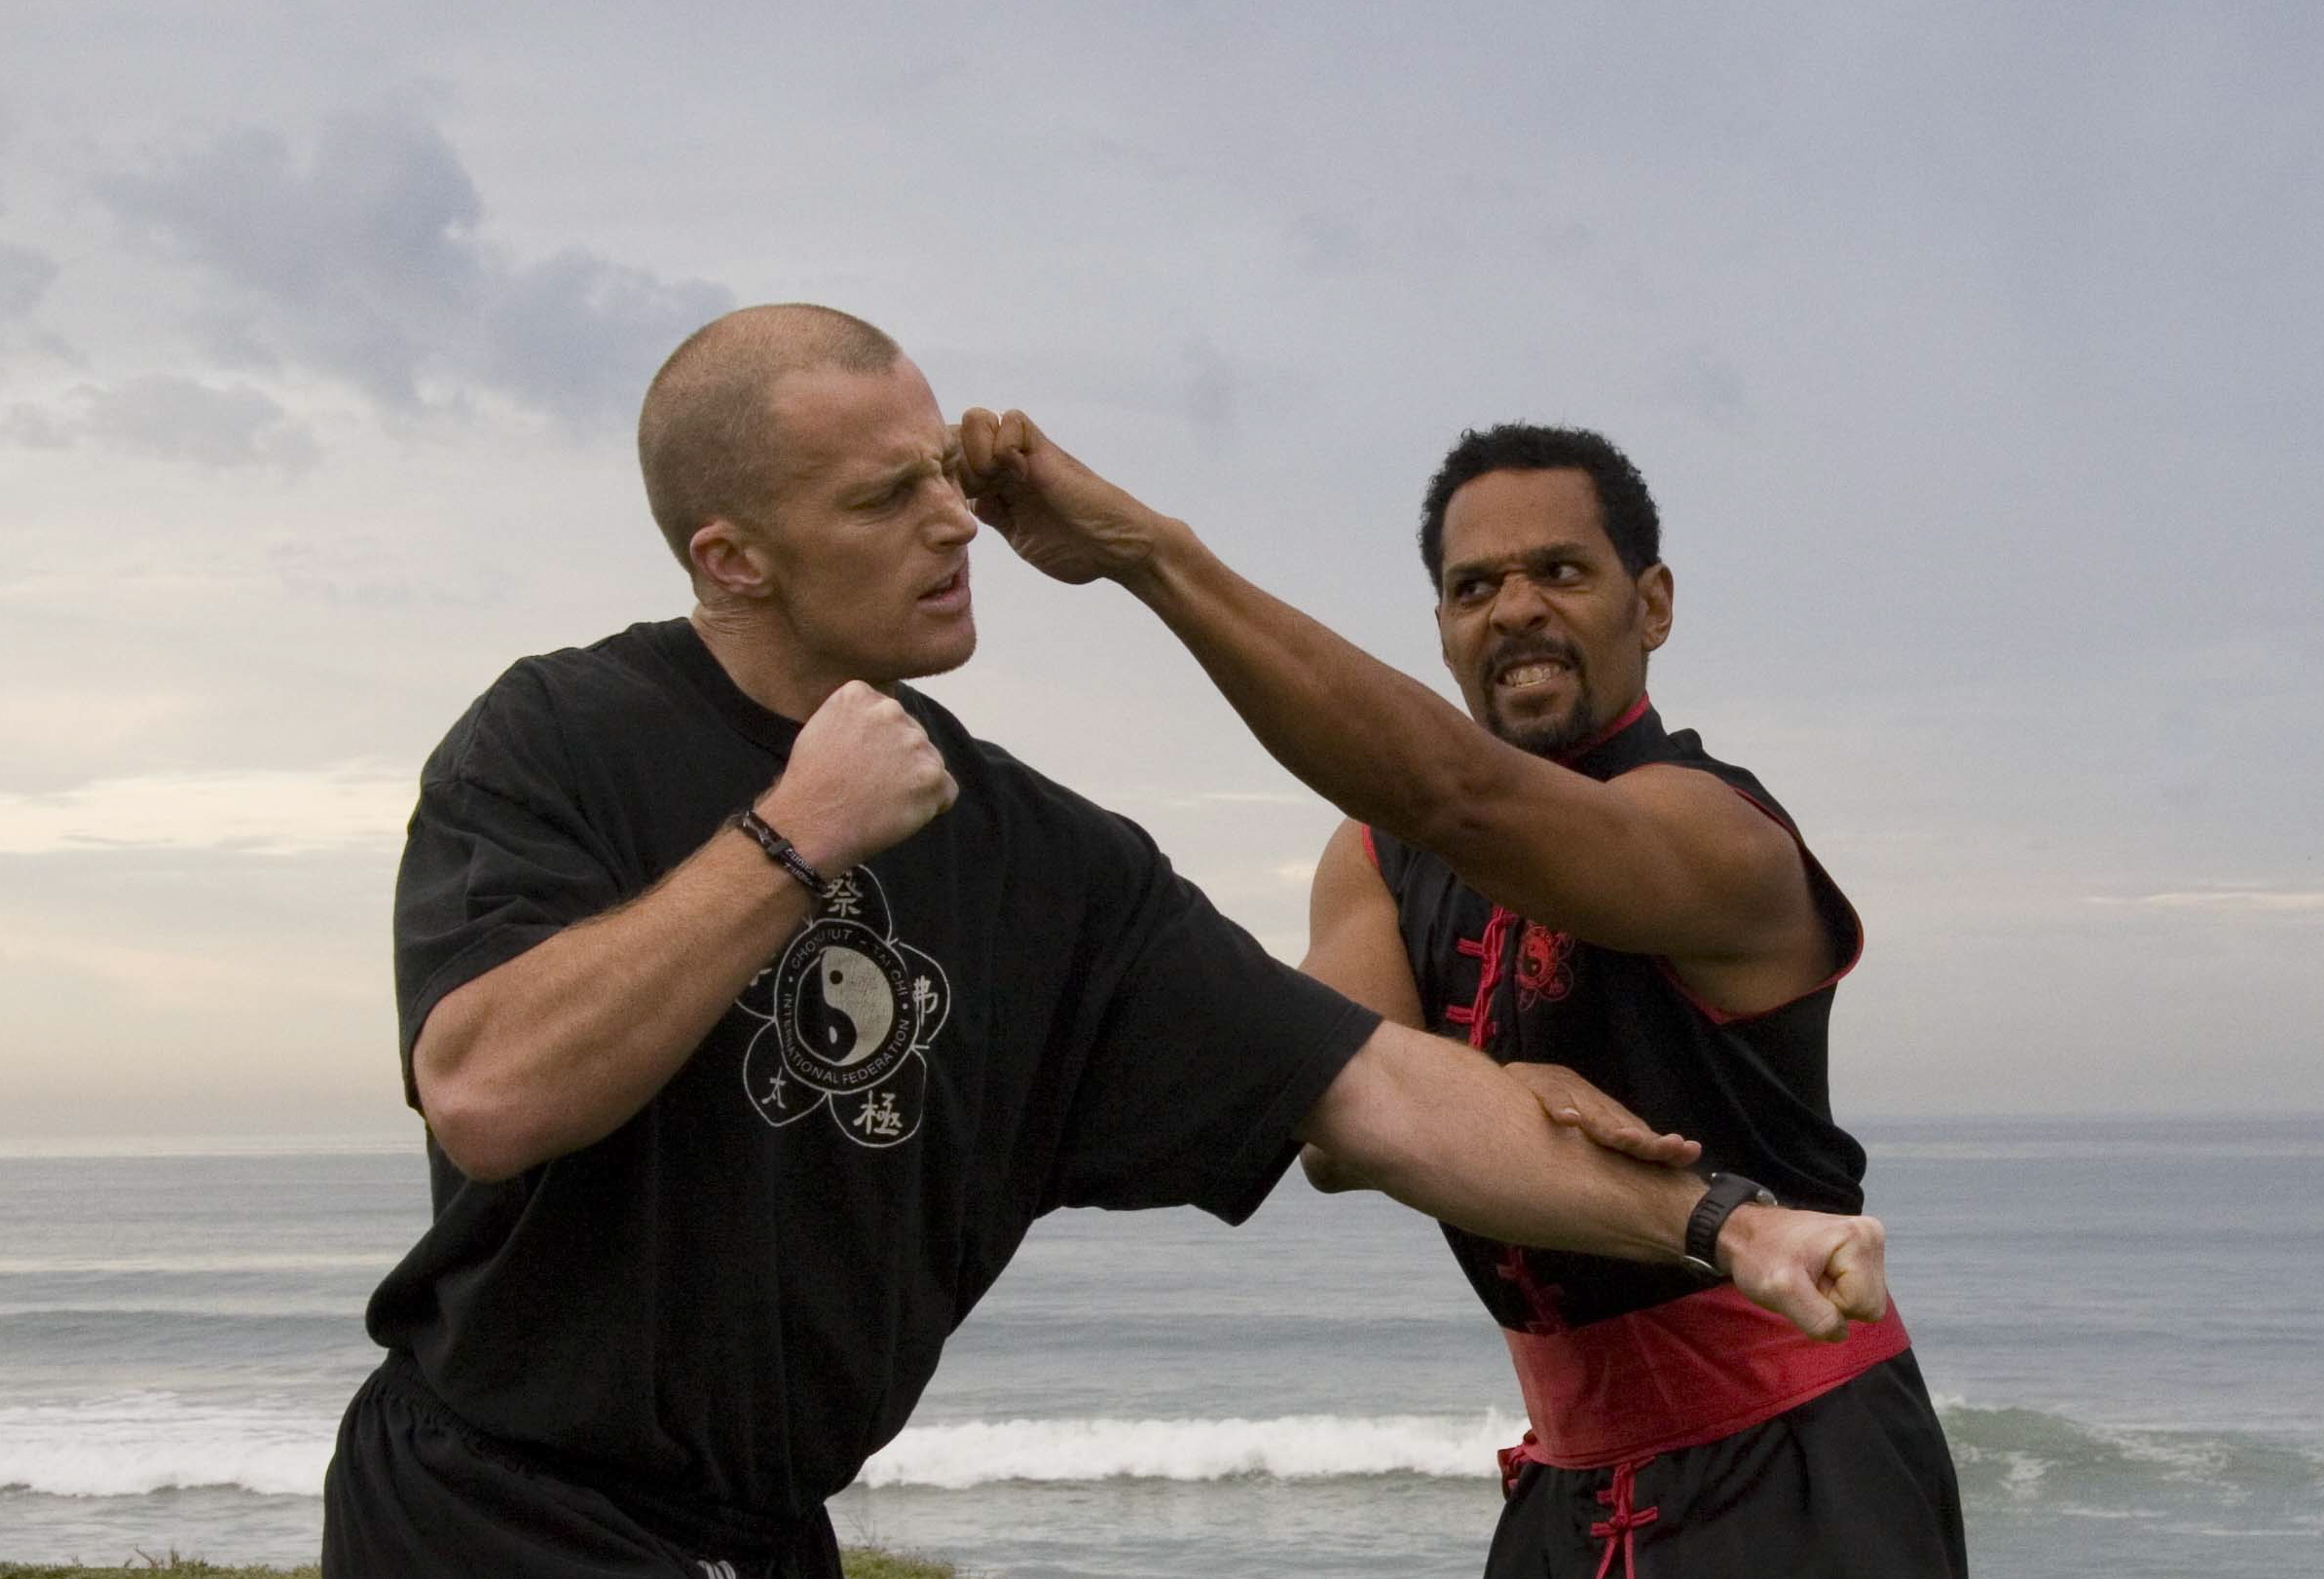 Inside Kung Fu Magazine Five Rounds of Fitness By: Quinn Early